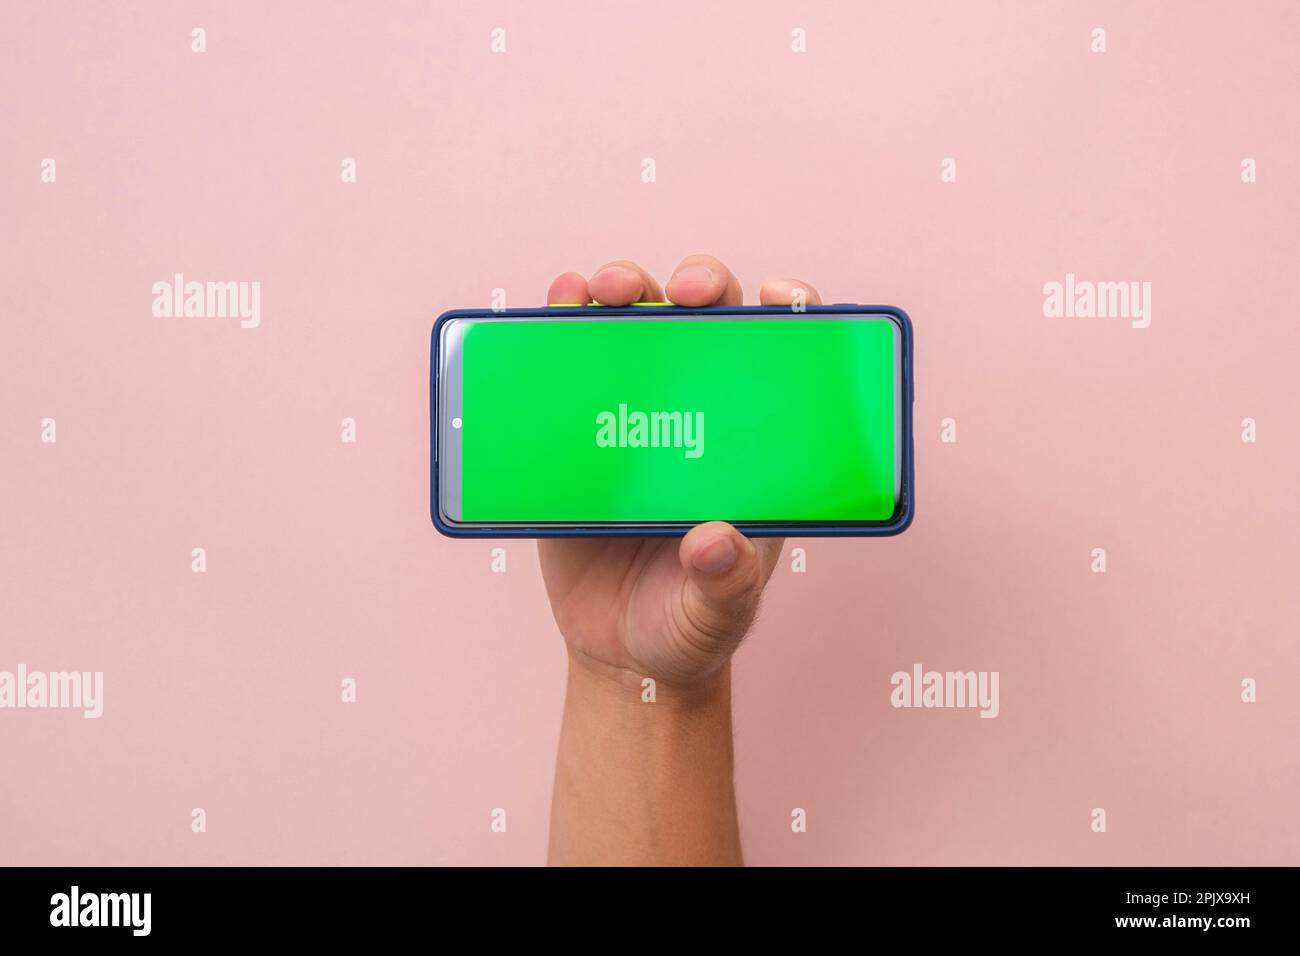 Human hand holding mobile smartphone with green screen in horizontal position isolated on pink background. Stock Photo